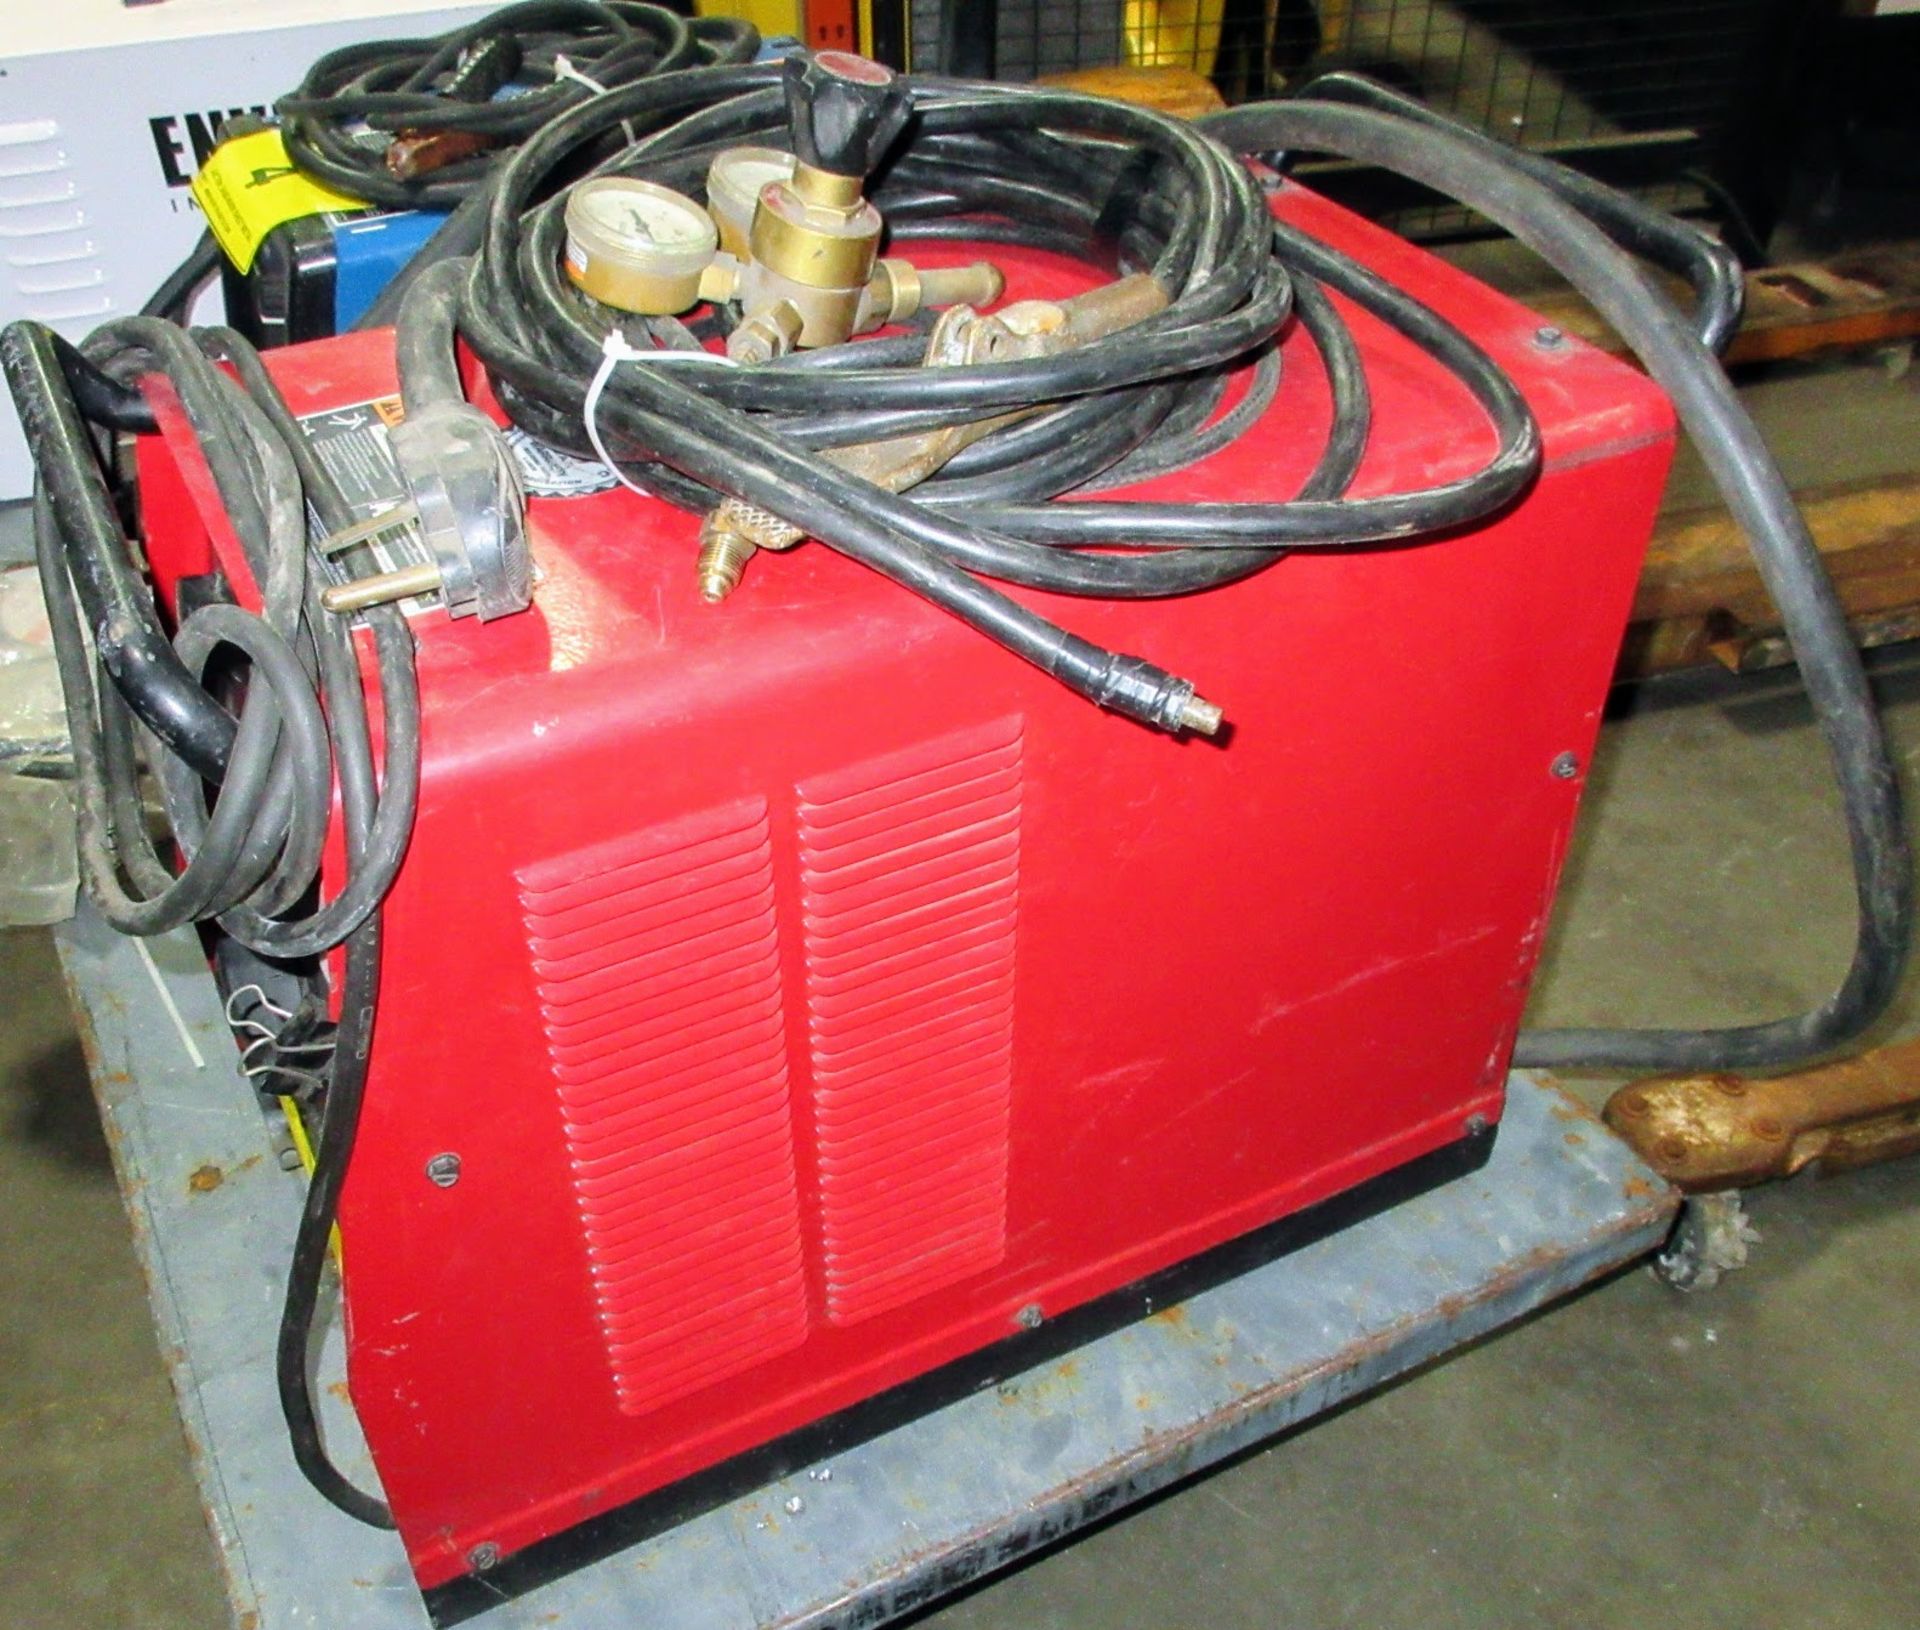 LINCOLN ELECTRIC SQUAREWAVE TIG 175 WELDER W/ CABLES - Image 2 of 4